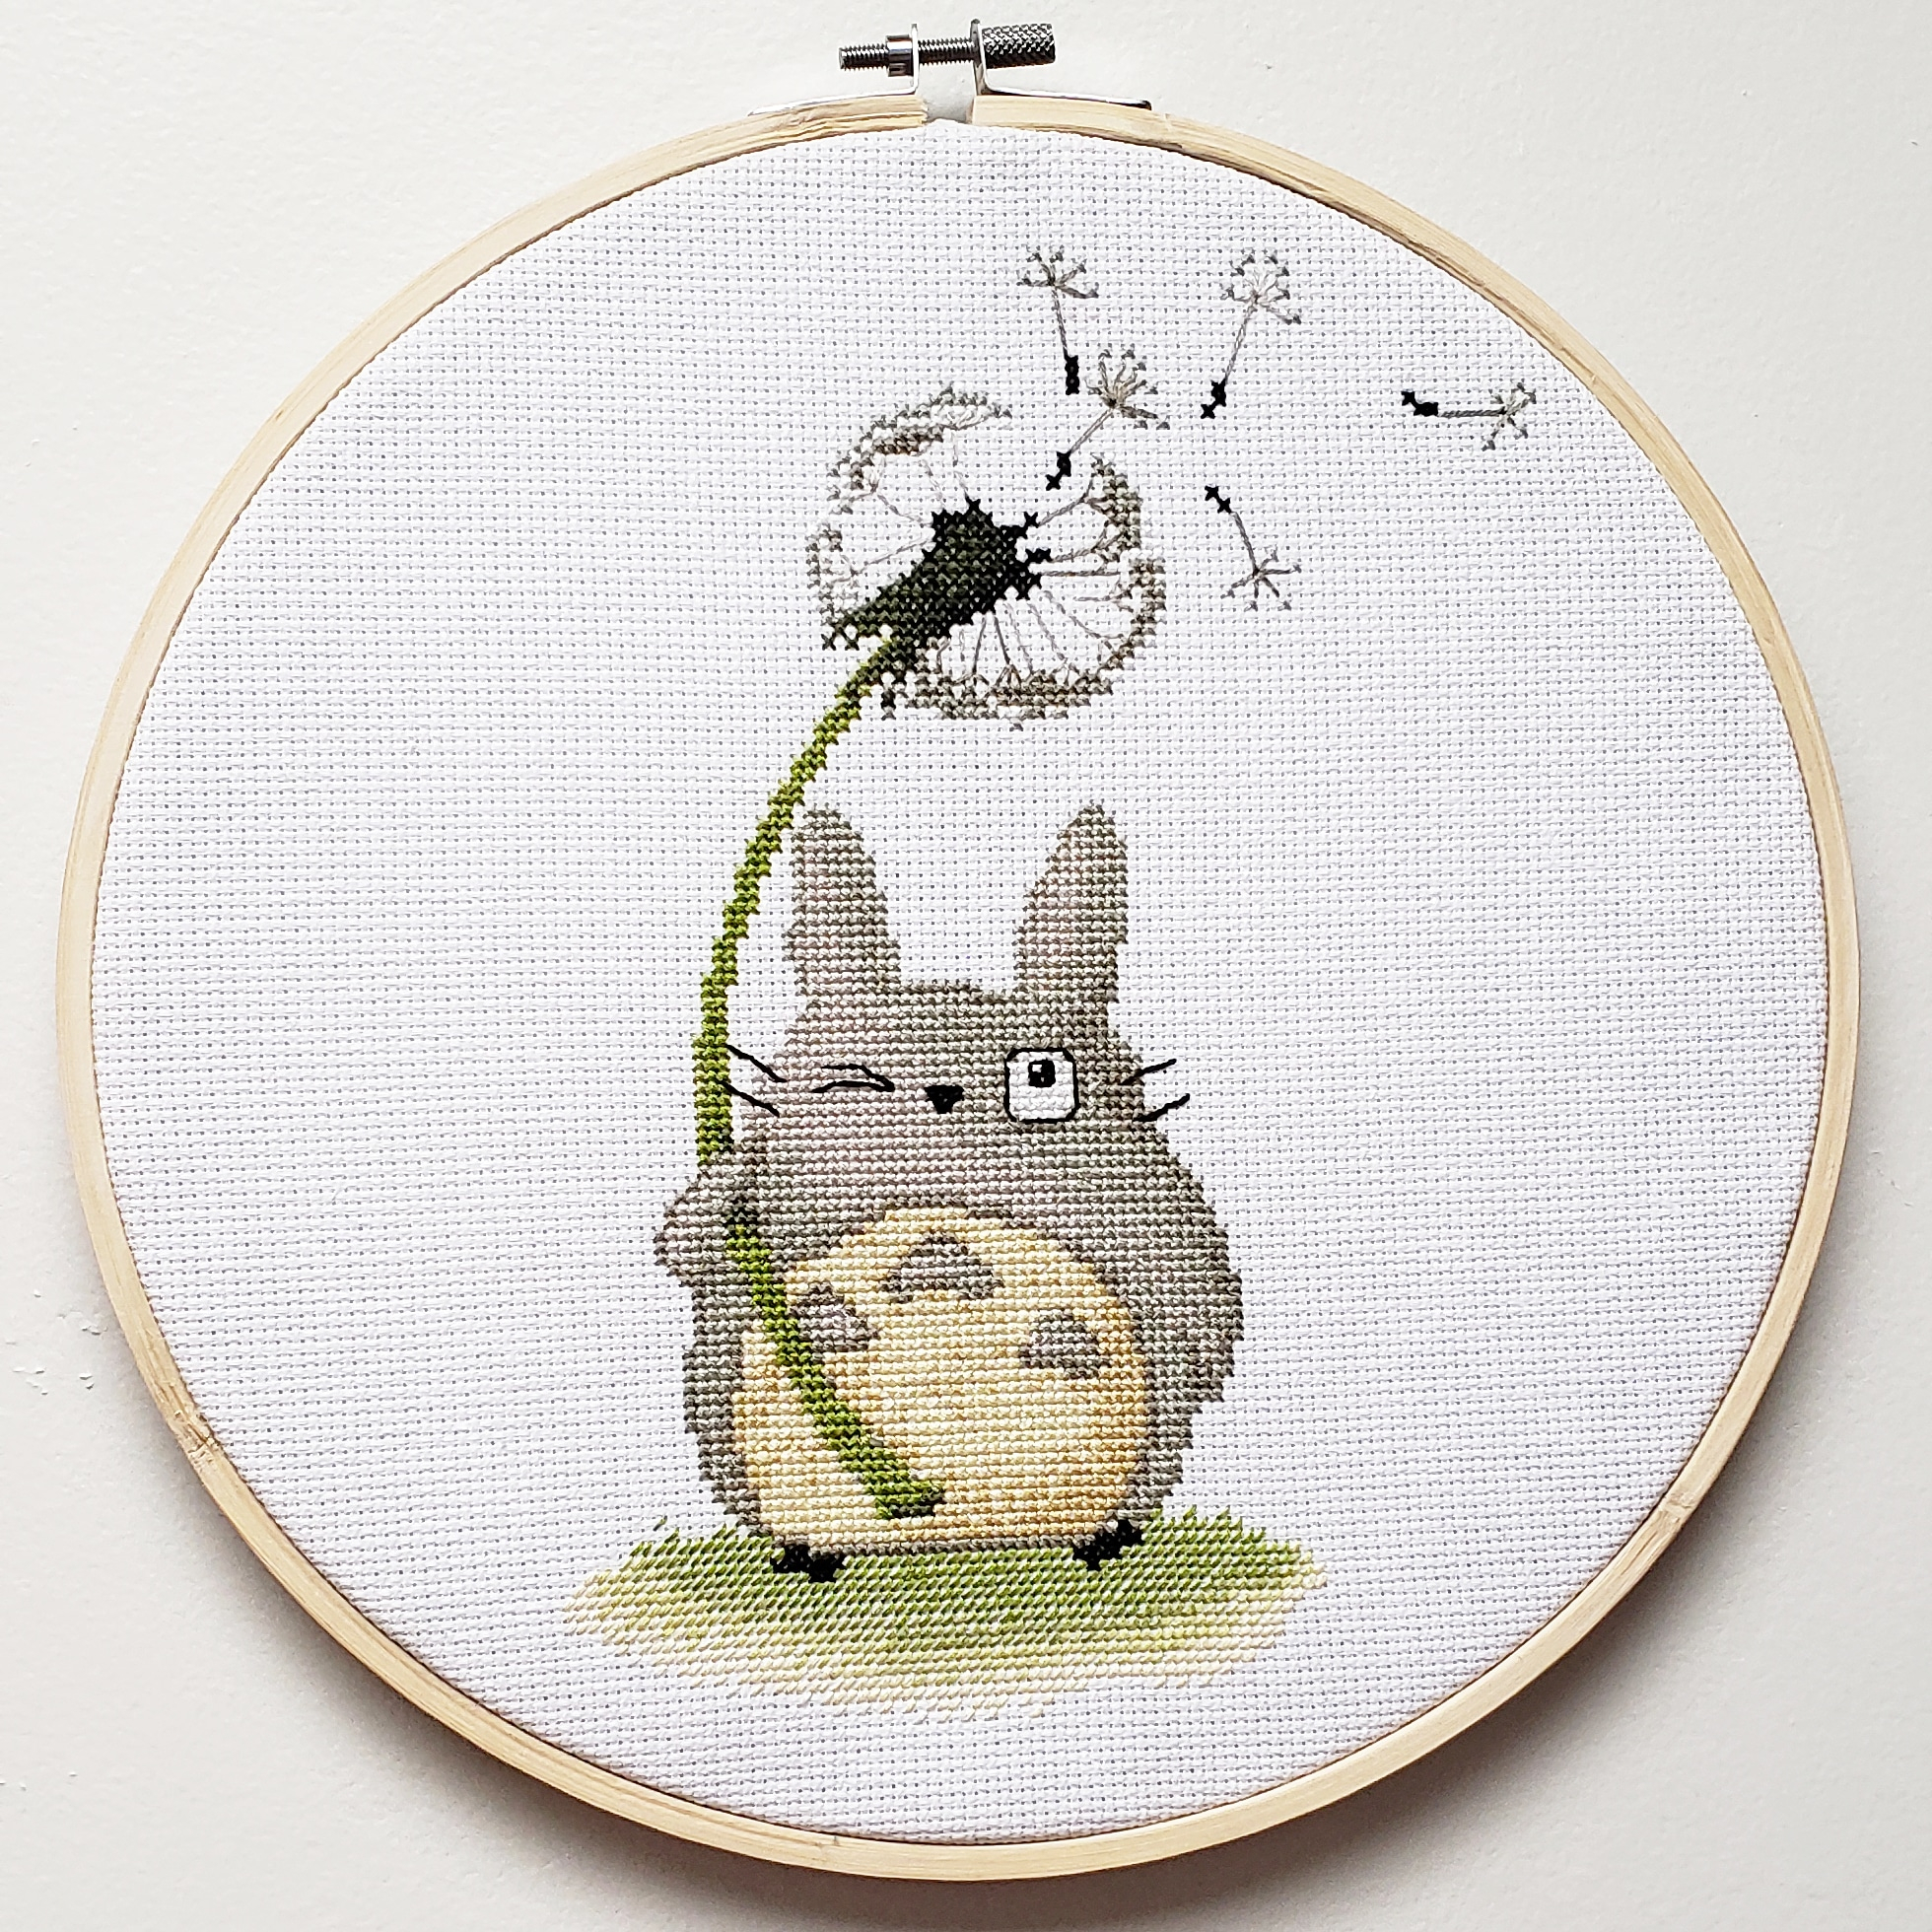 Totoro Embroidery Pattern Fo I Finally Finished Totoro He Is My 4th Ever Cross Stitch